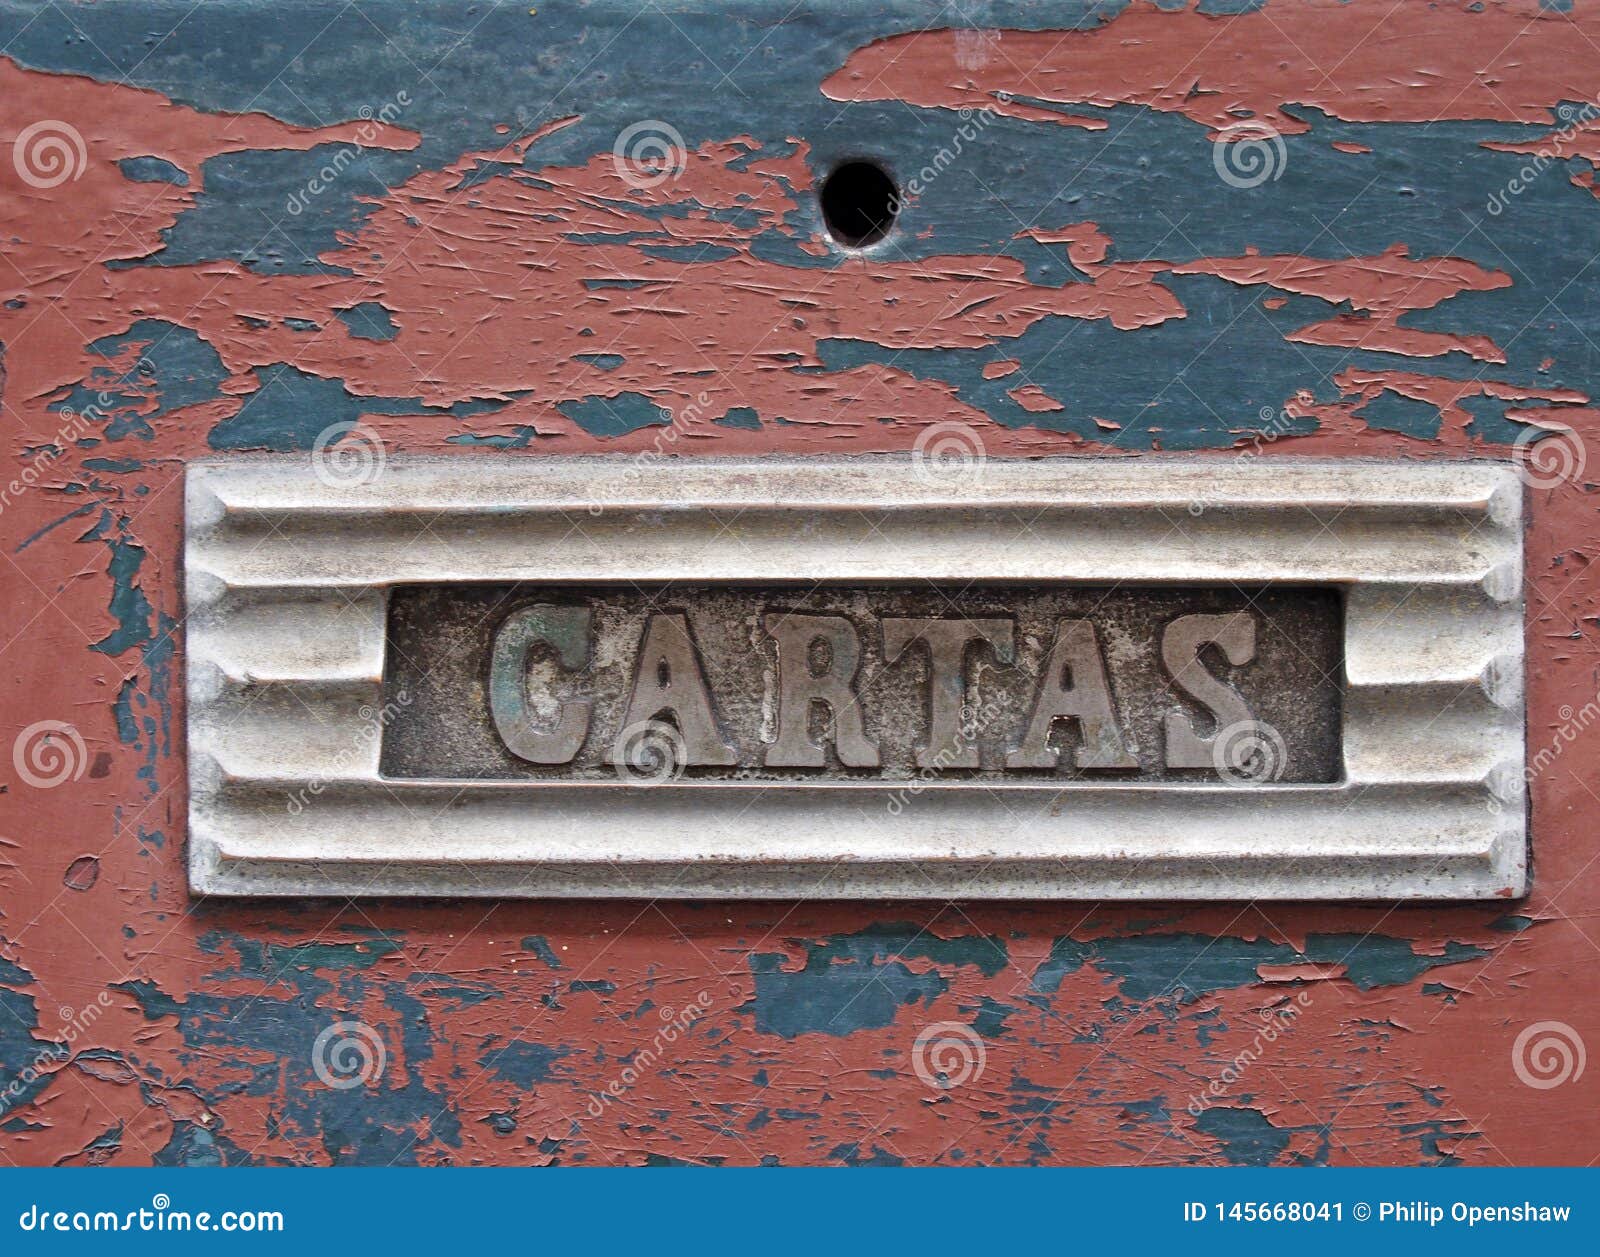 old metal letterbox in a red wooden door with chipped peeling paint with the word cartas, translation from portuguese is mail